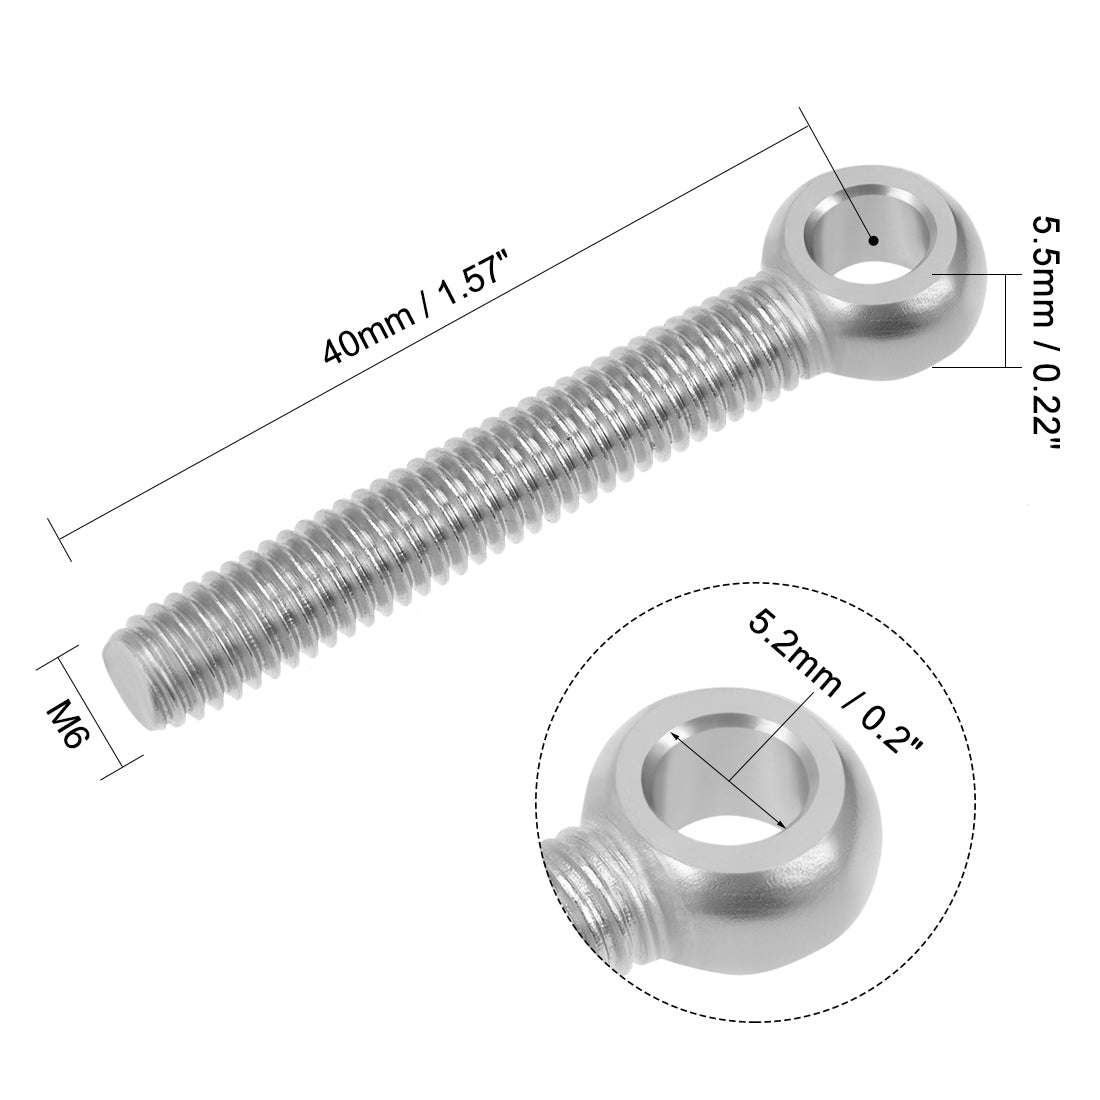 uxcell Uxcell M6 x 40mm Machinery Shoulder Swing Lifting Eye Bolt 304 Stainless Steel Metric Thread 2pcs